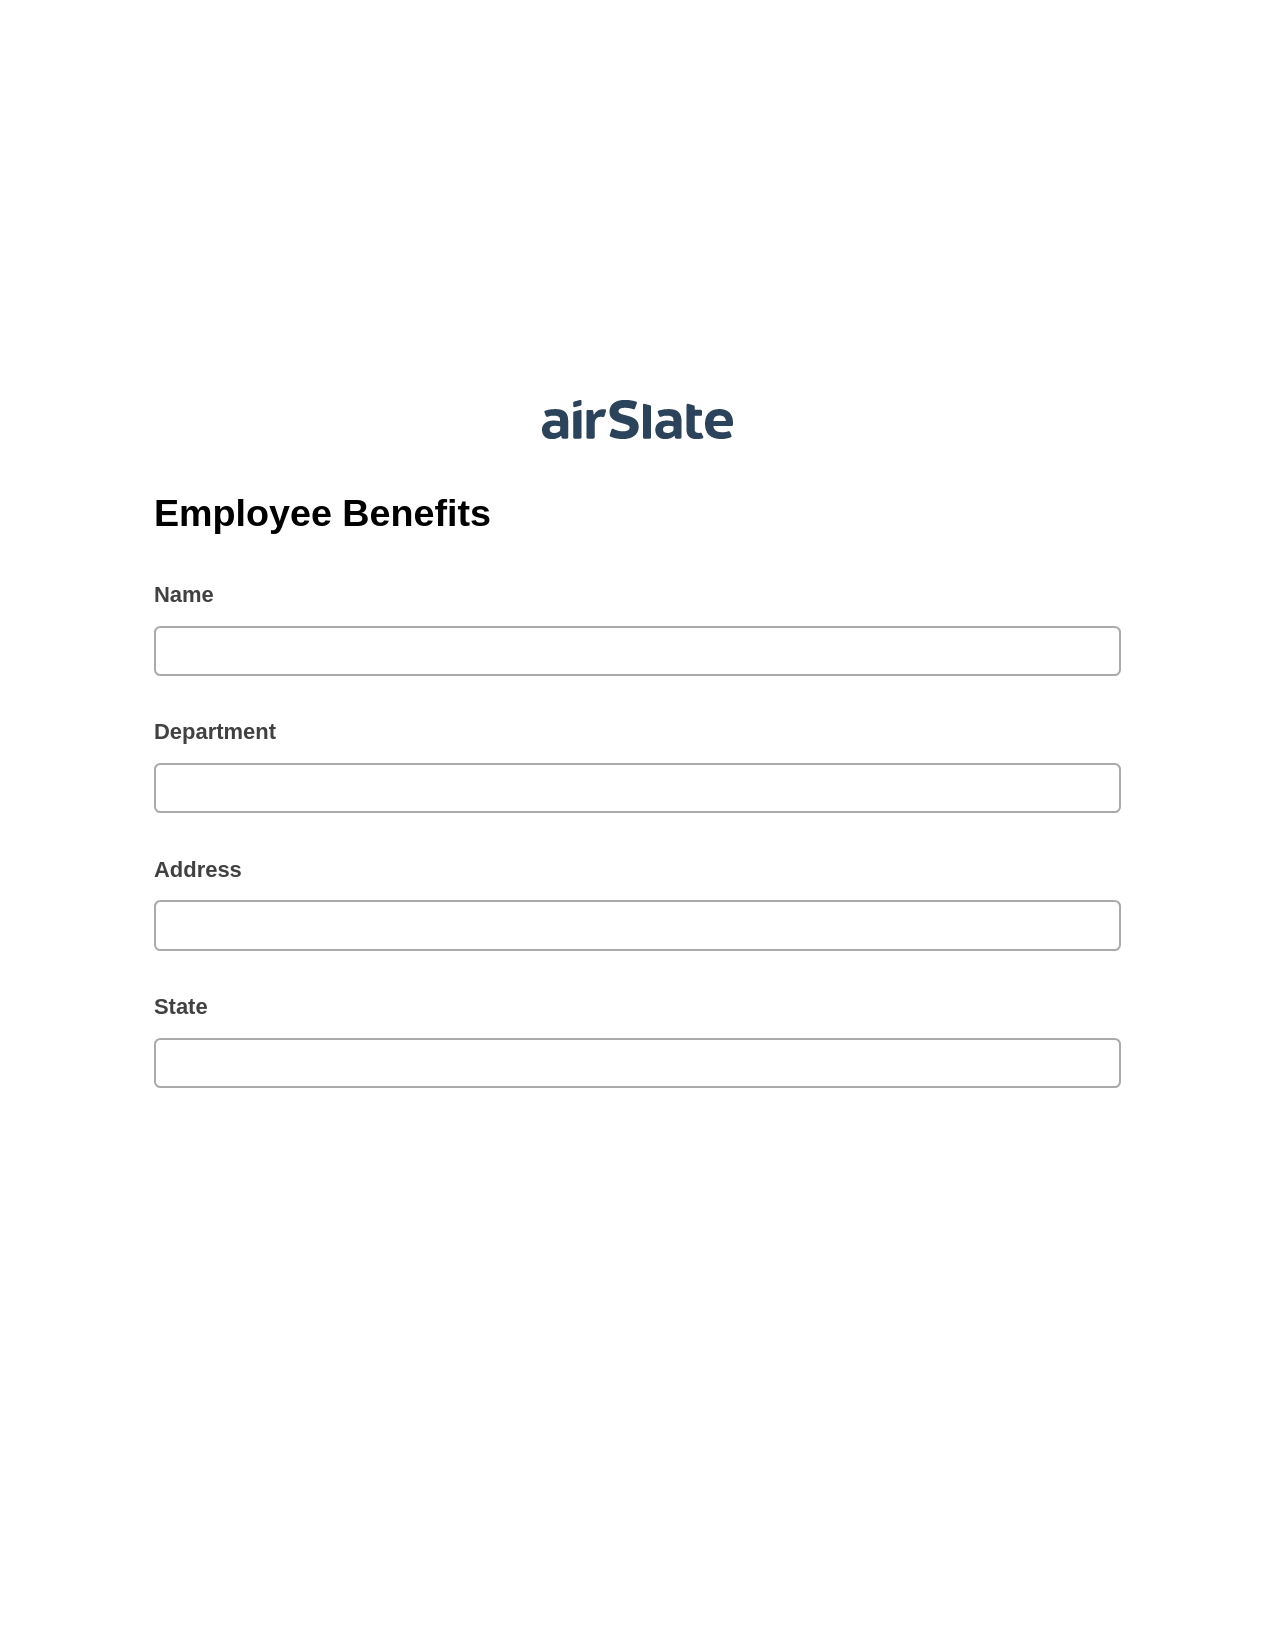 Employee Benefits Pre-fill from Excel Spreadsheet Bot, Create MS Dynamics 365 Records Bot, Google Drive Bot